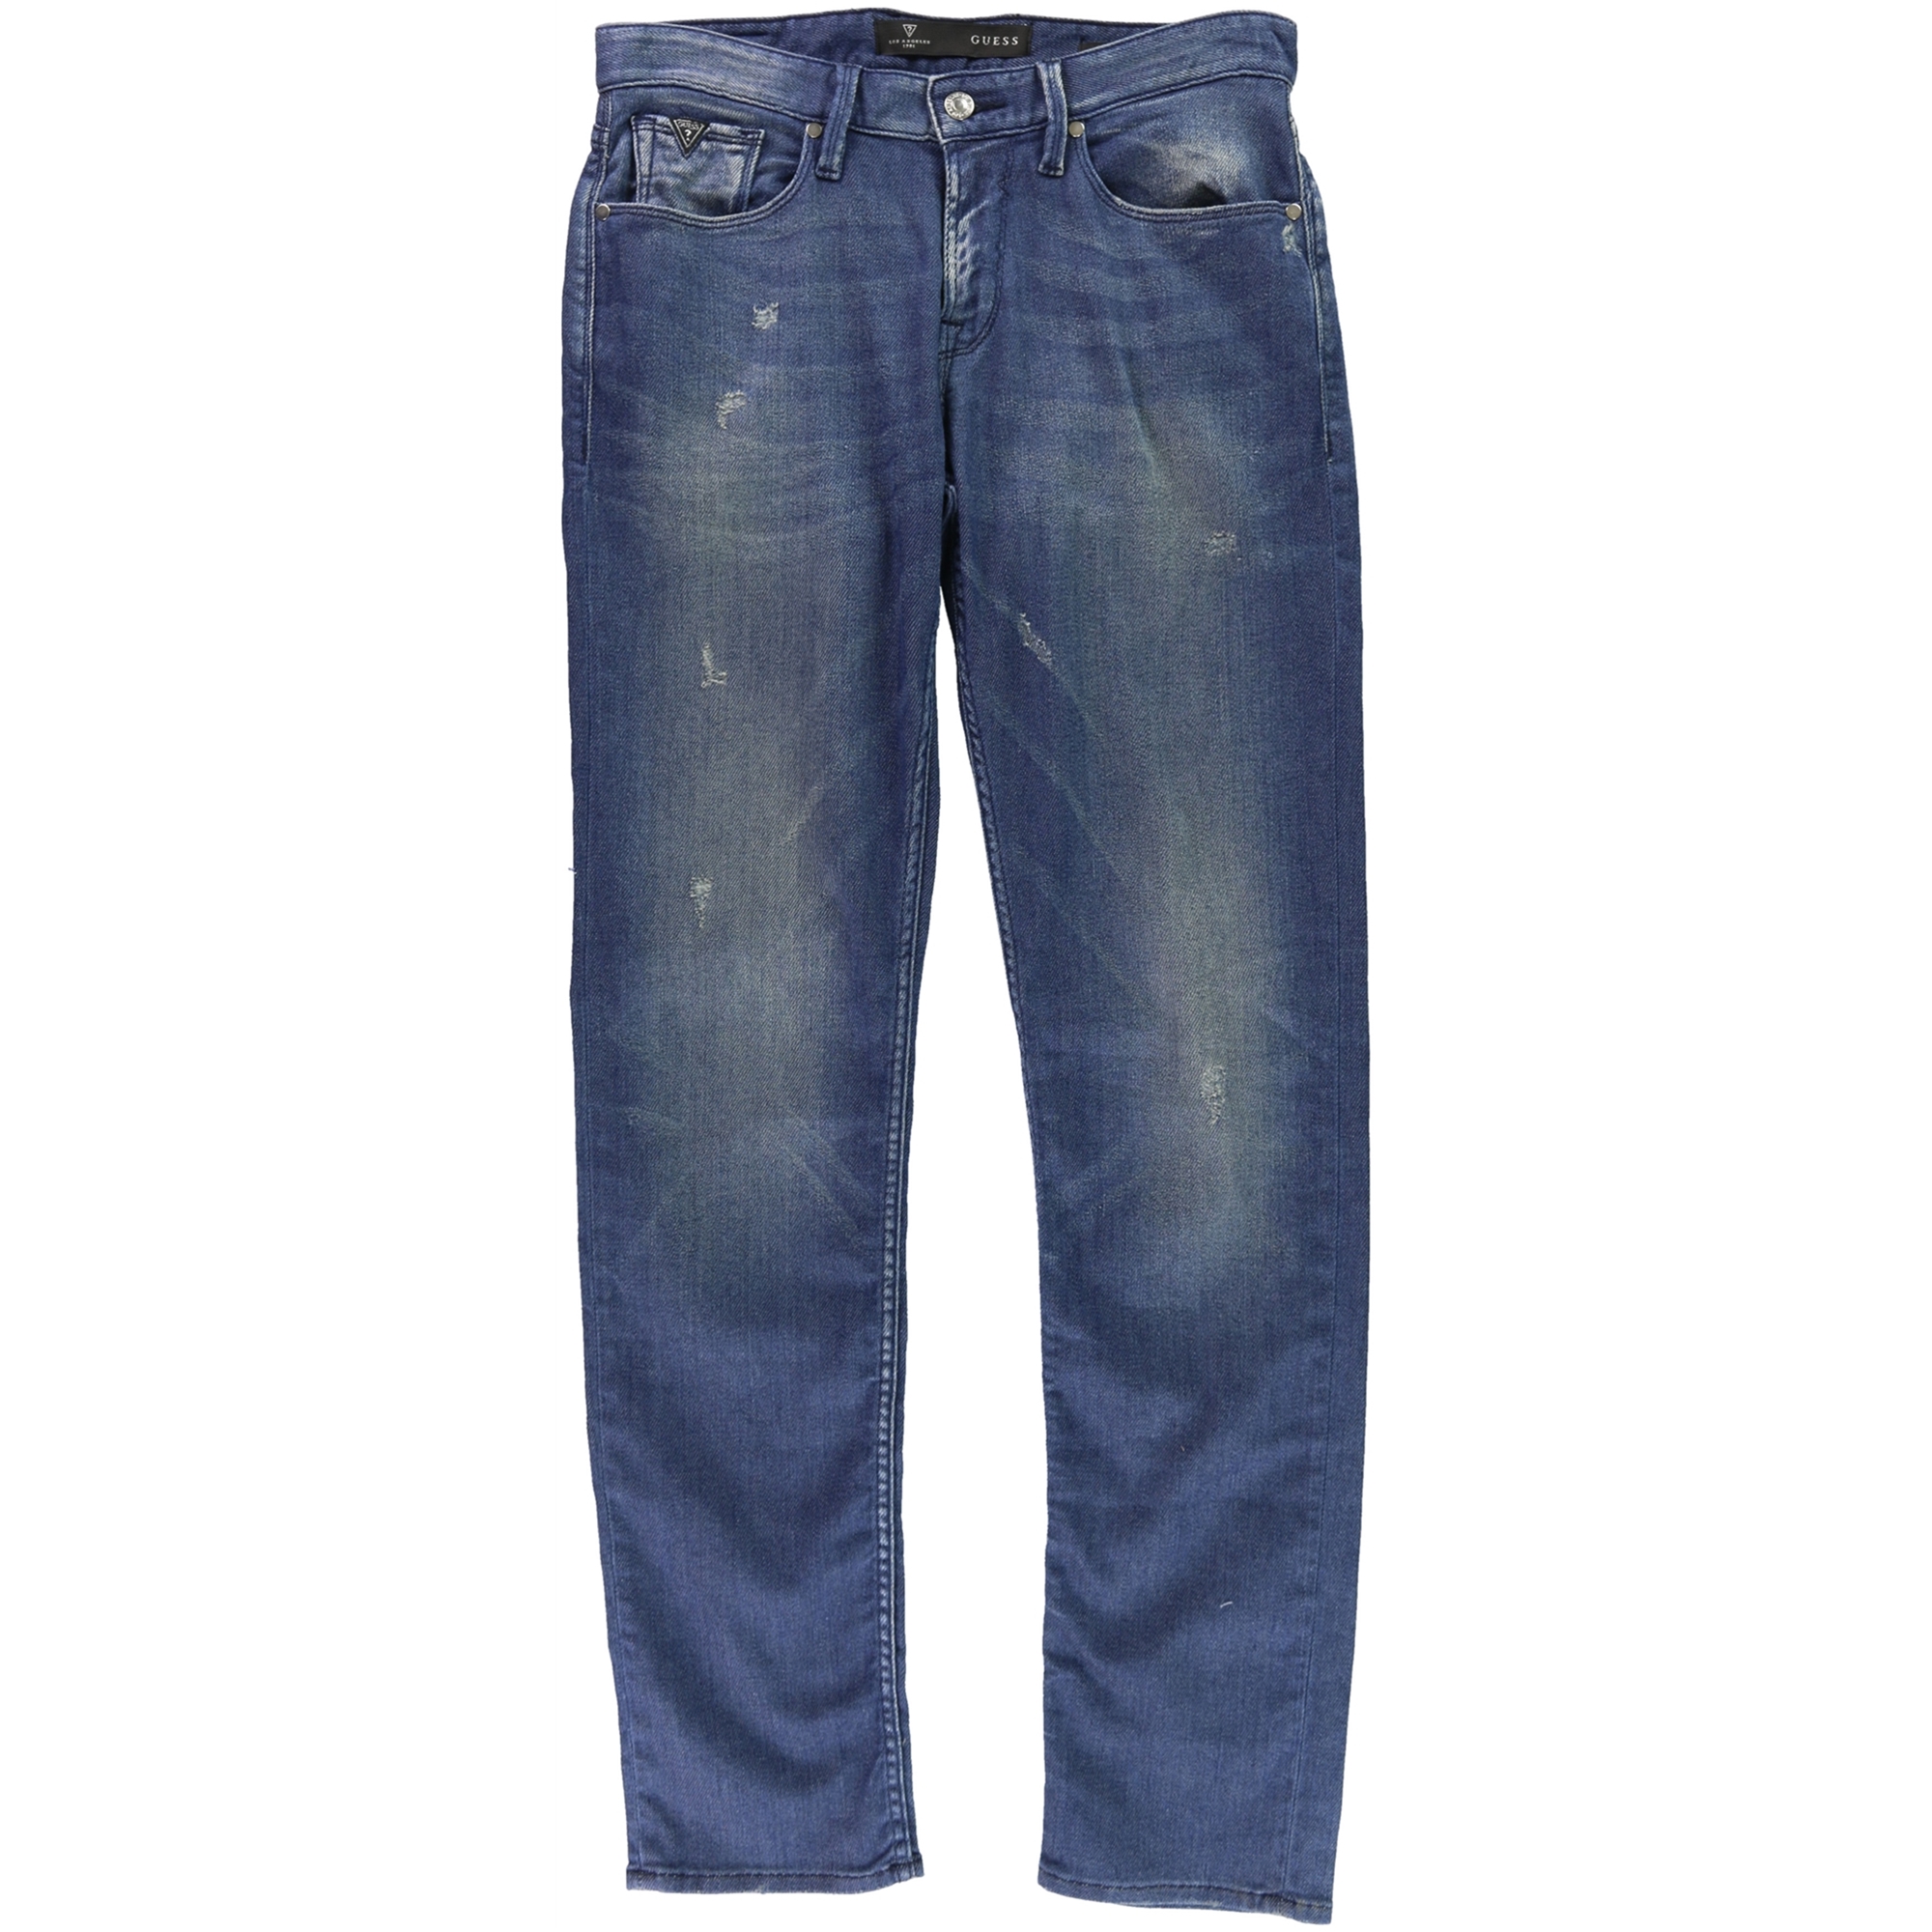 GUESS Mens Slim Straight Leg Jeans | Mens Apparel | Free Shipping on ...